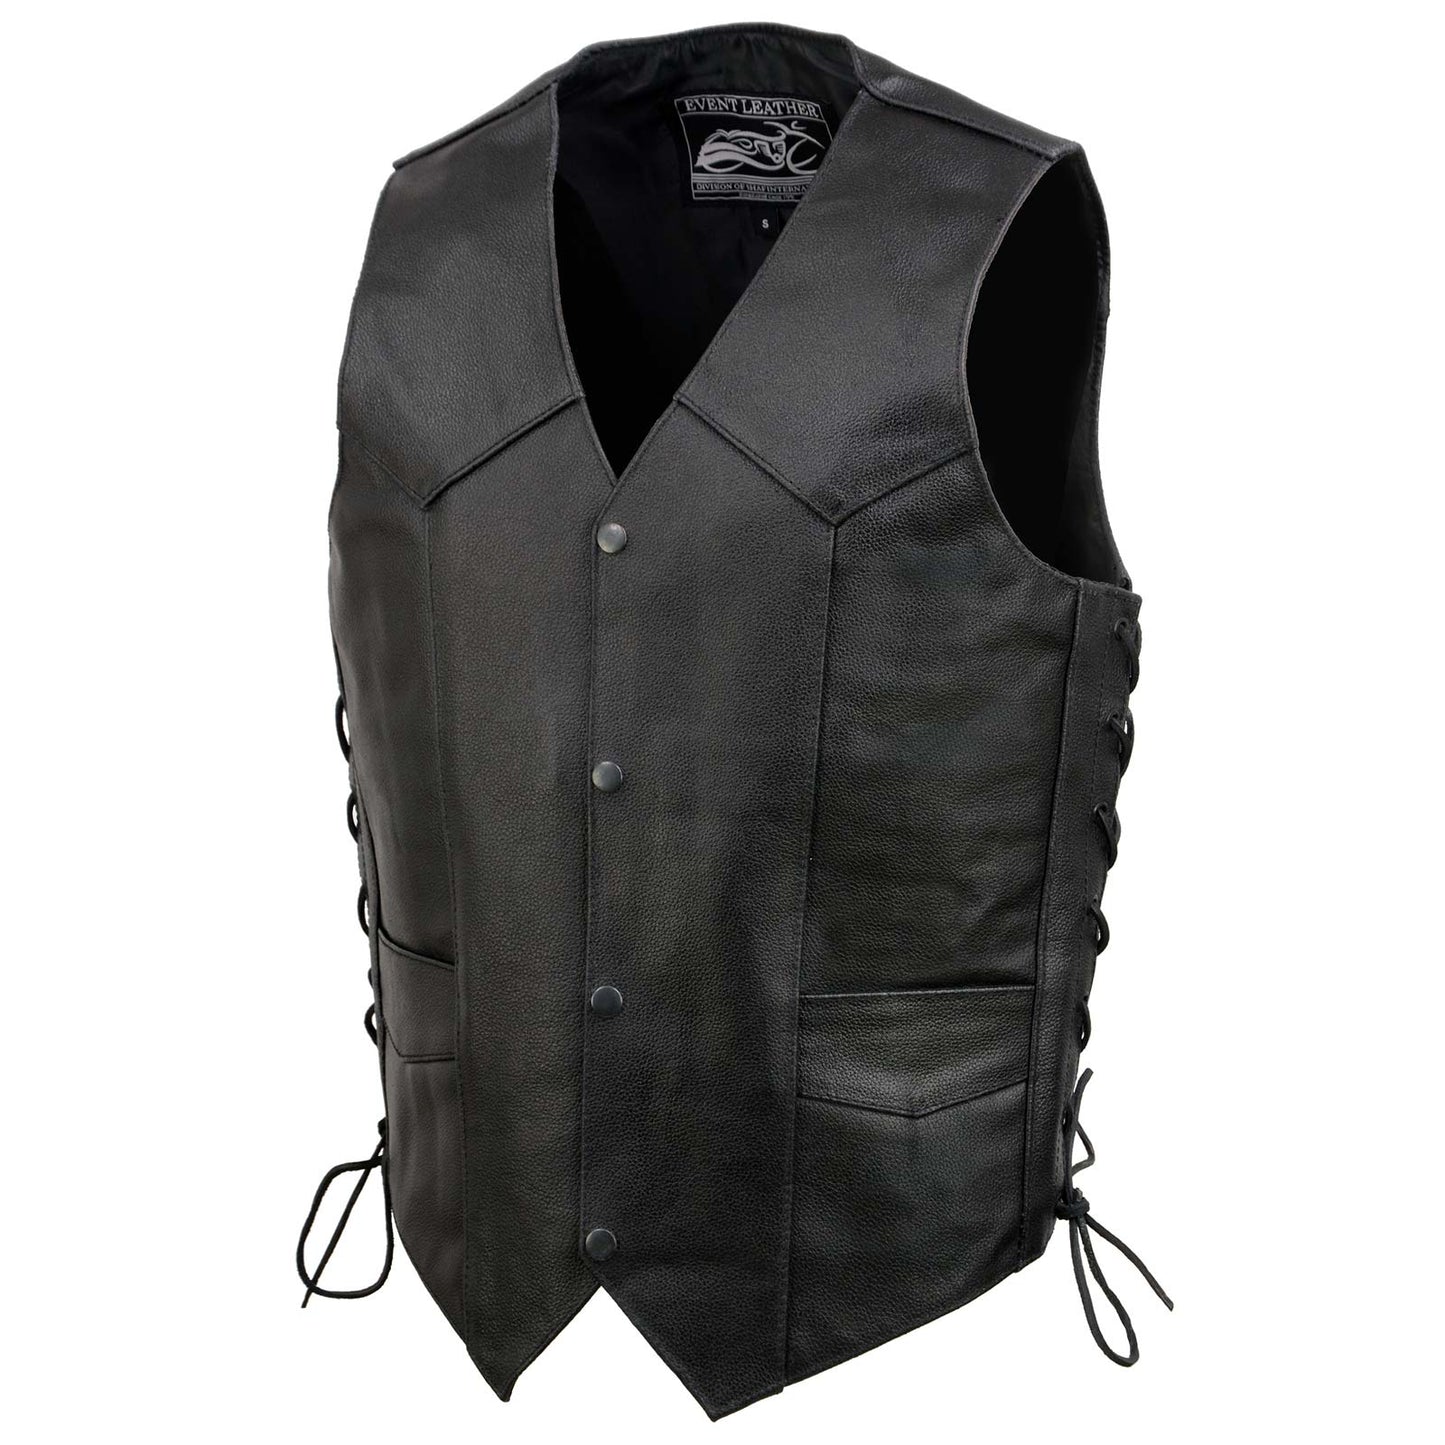 Event Leather EL5315 Black Motorcycle Leather Vest for Men w/ Side Lace- Riding Club Adult Motorcycle Vests